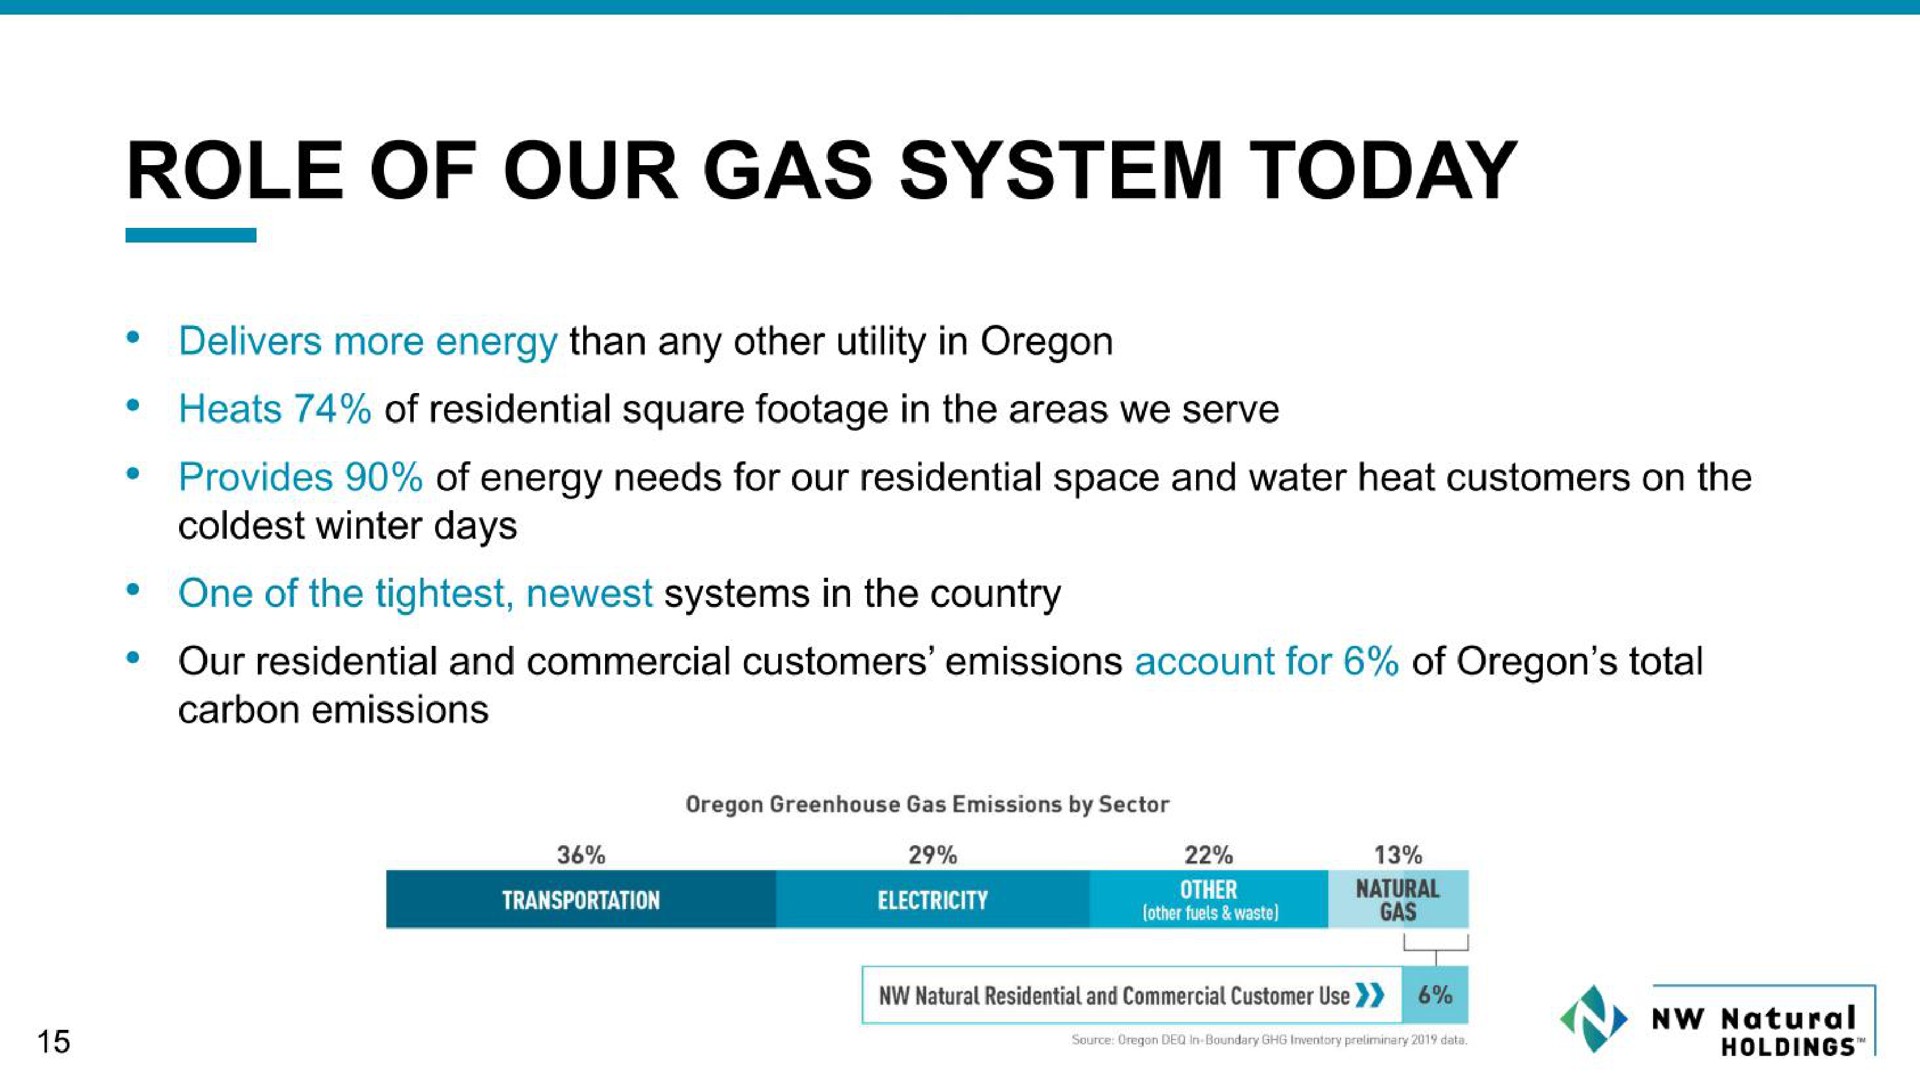 role of our gas system today | NW Natural Holdings